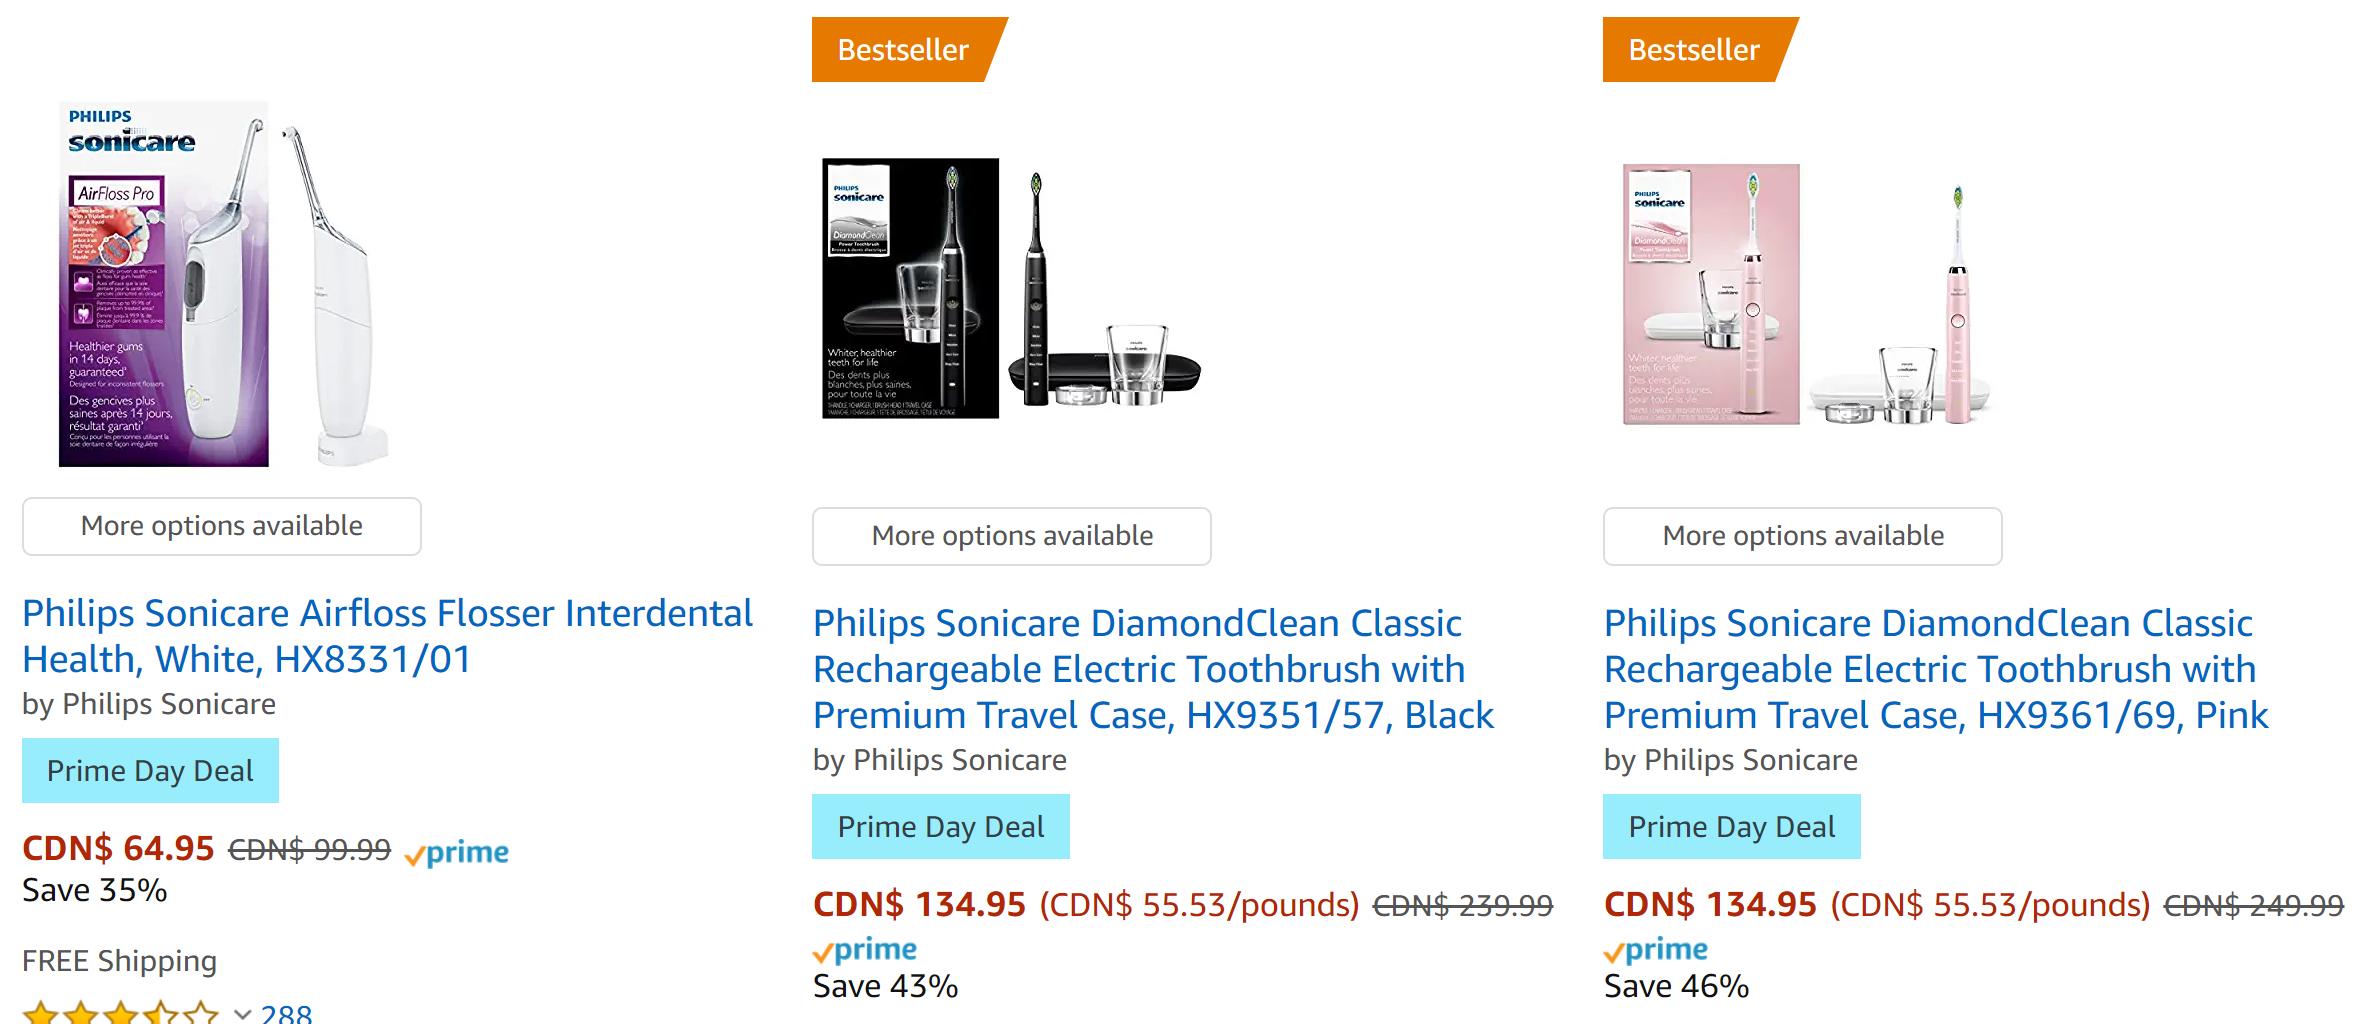 philips-philips-electric-toothbrushes-razors-etc-as-low-as-50-off-2020-10-14